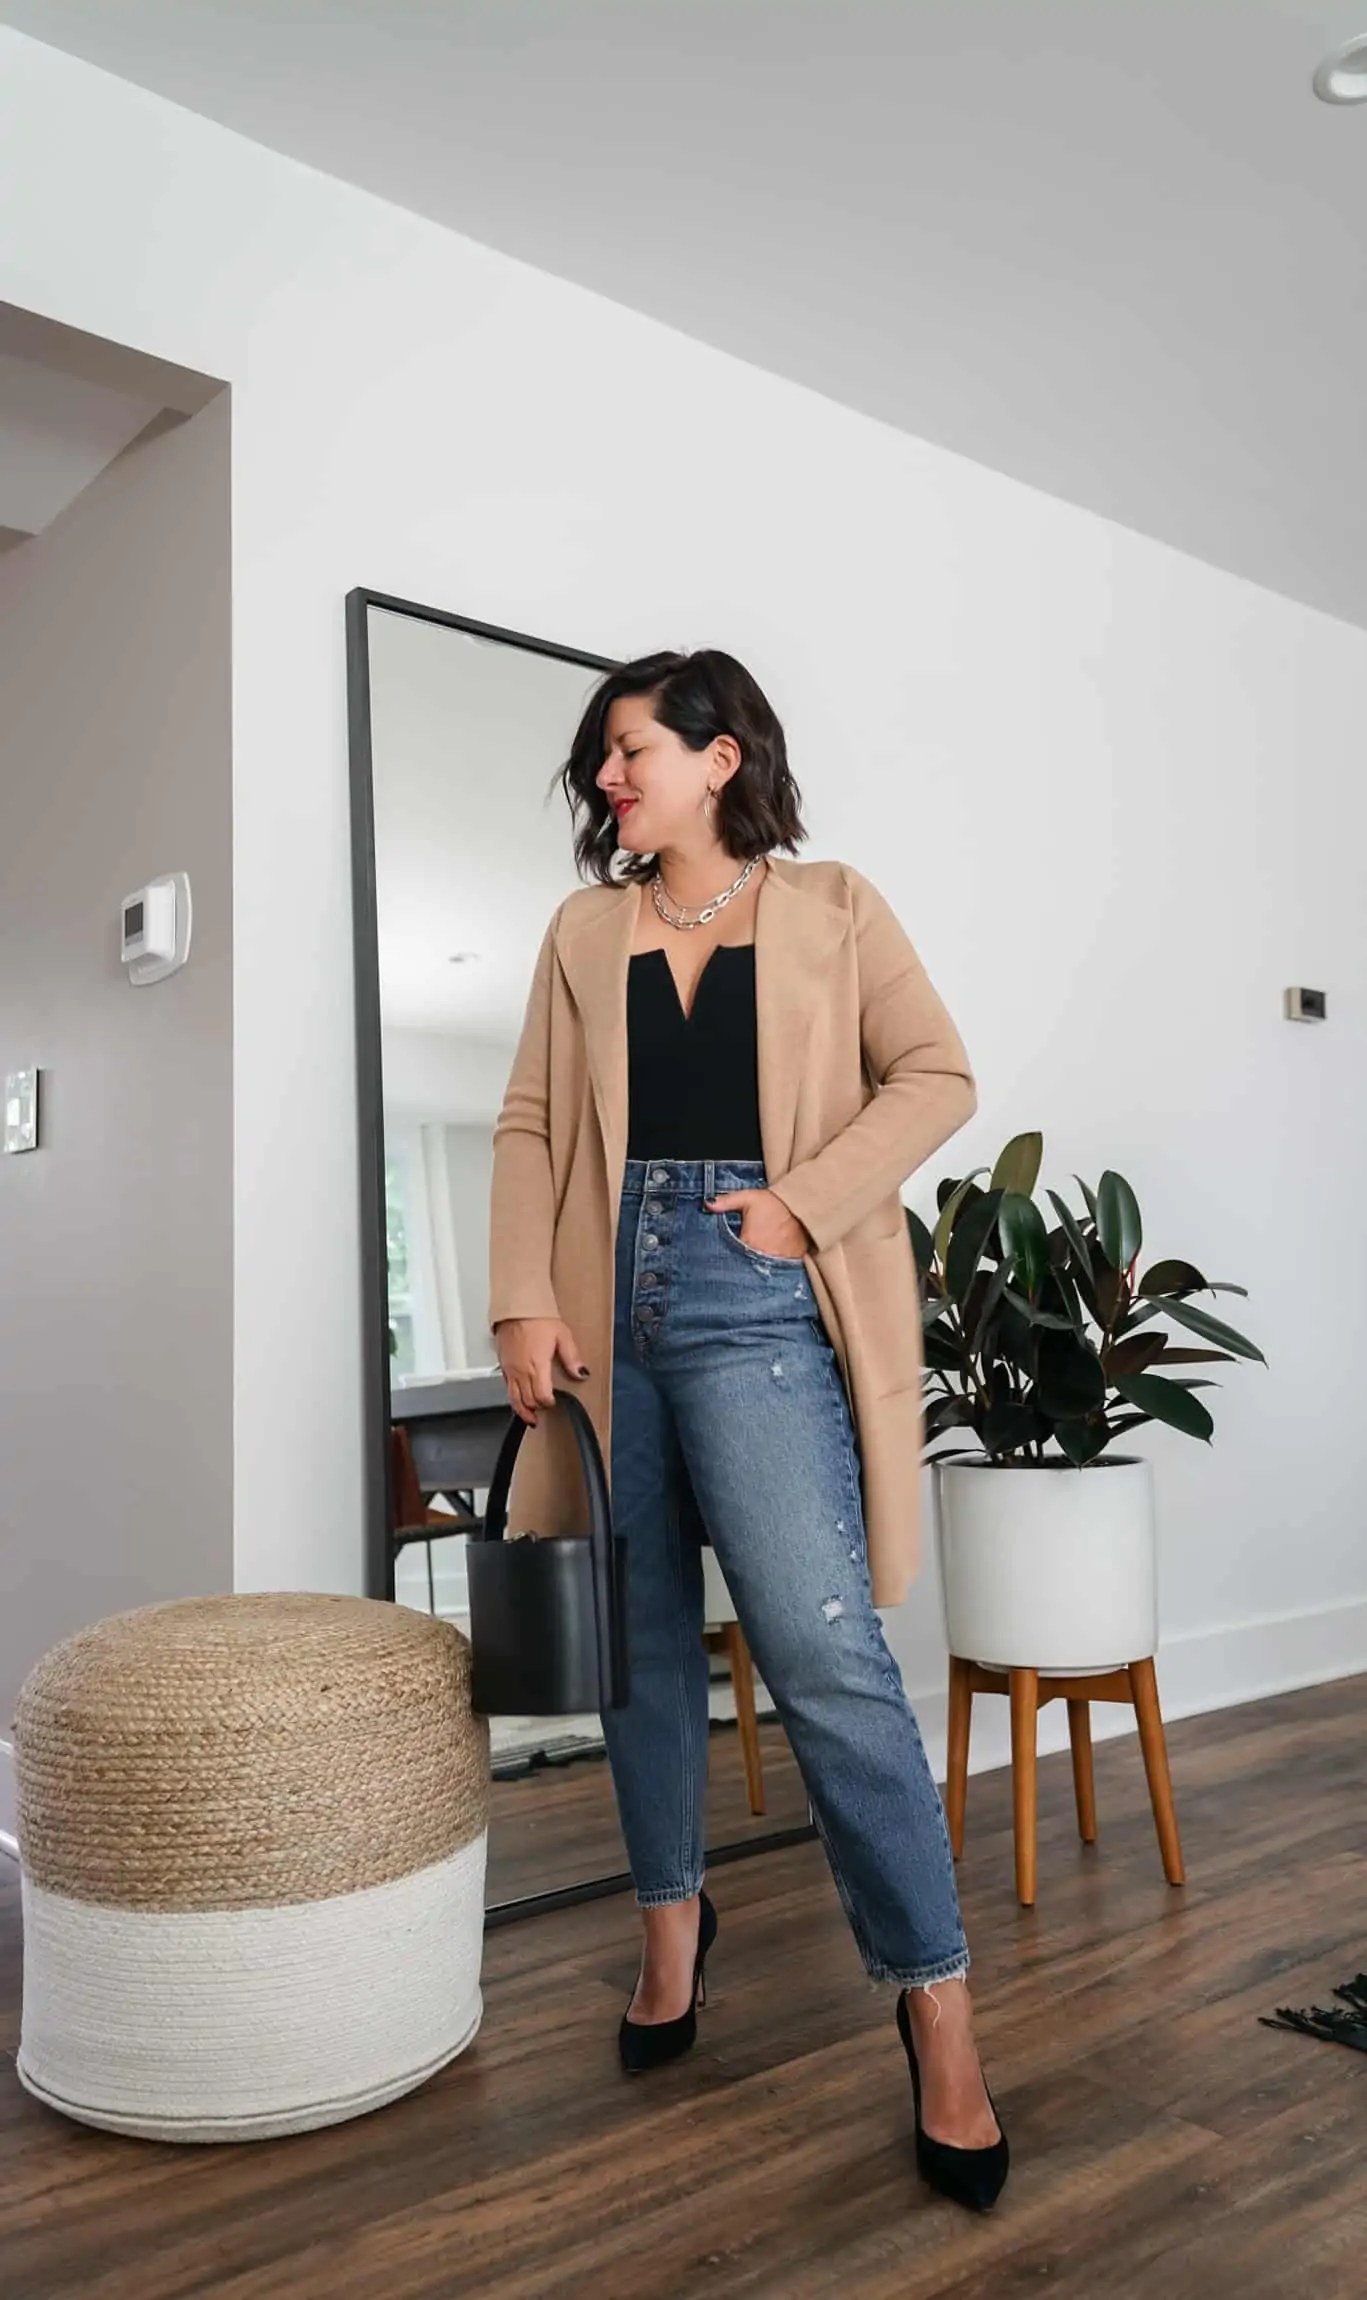 A Lily Love Affair shares how to wear a long cardigan with denim, black tank top and black heels